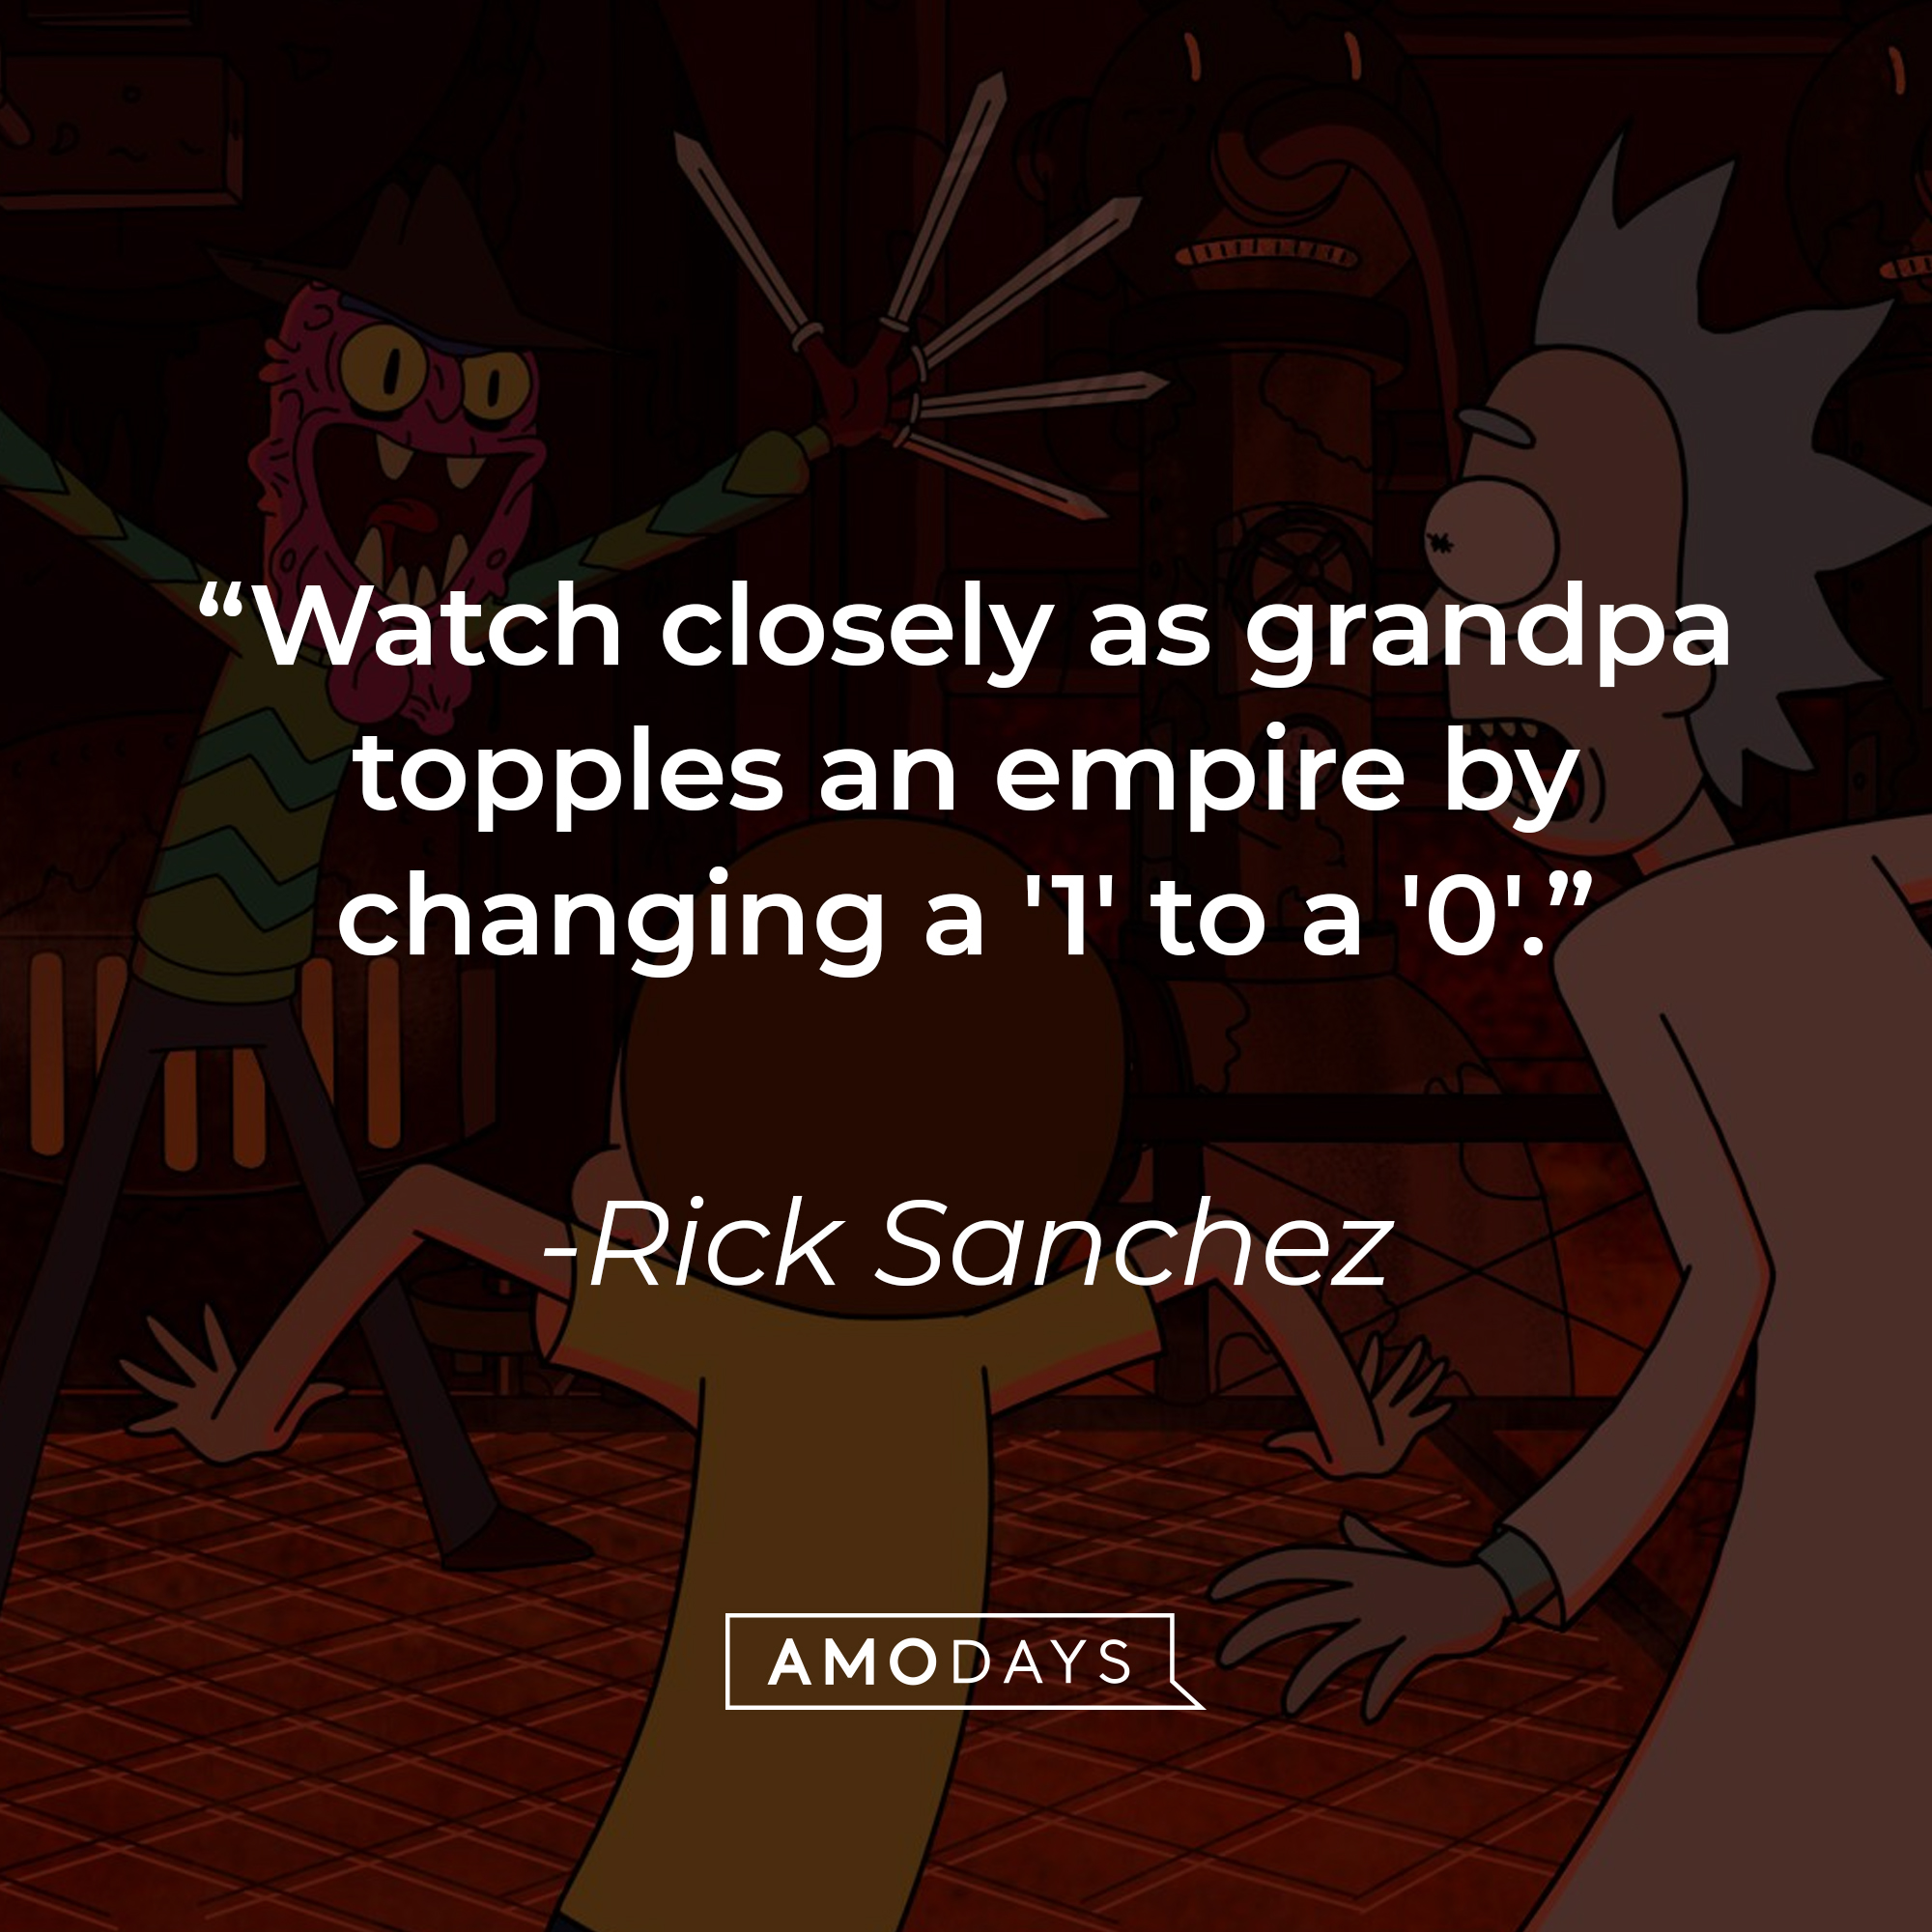 Rick, Morty, and another character with Rick Sanchez’s quote: "Watch closely as grandpa topples an empire by changing a '1' To A '0'." | Source: Facebook.com/RickandMorty